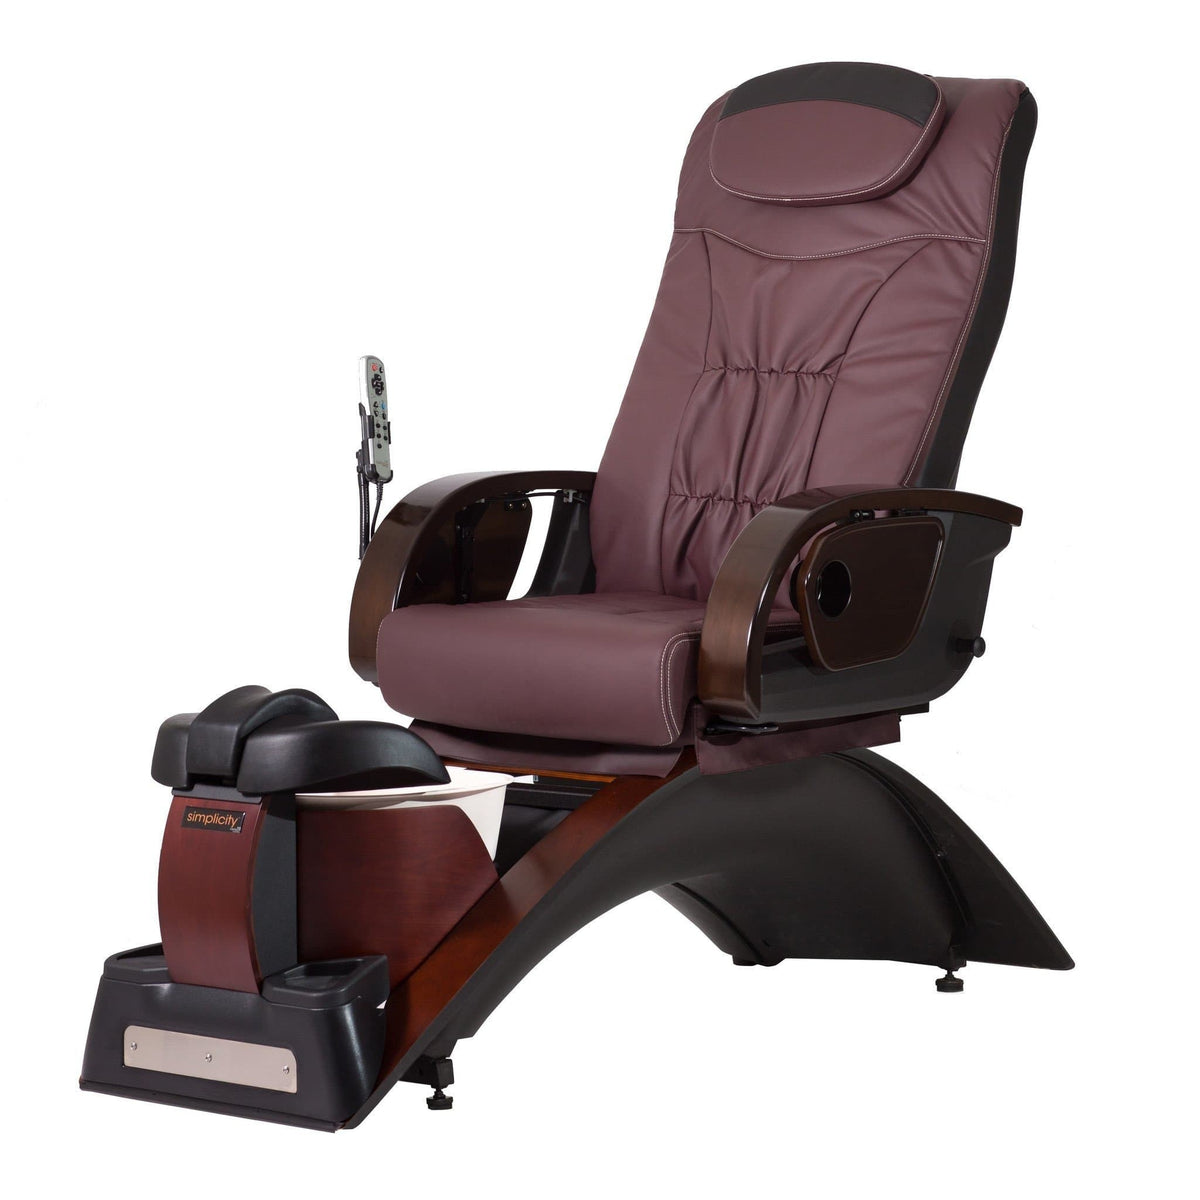 Continuum Continuum Simplicity LE Pedicure Spa Chair Pedicure &amp; Spa Chairs - ChairsThatGive